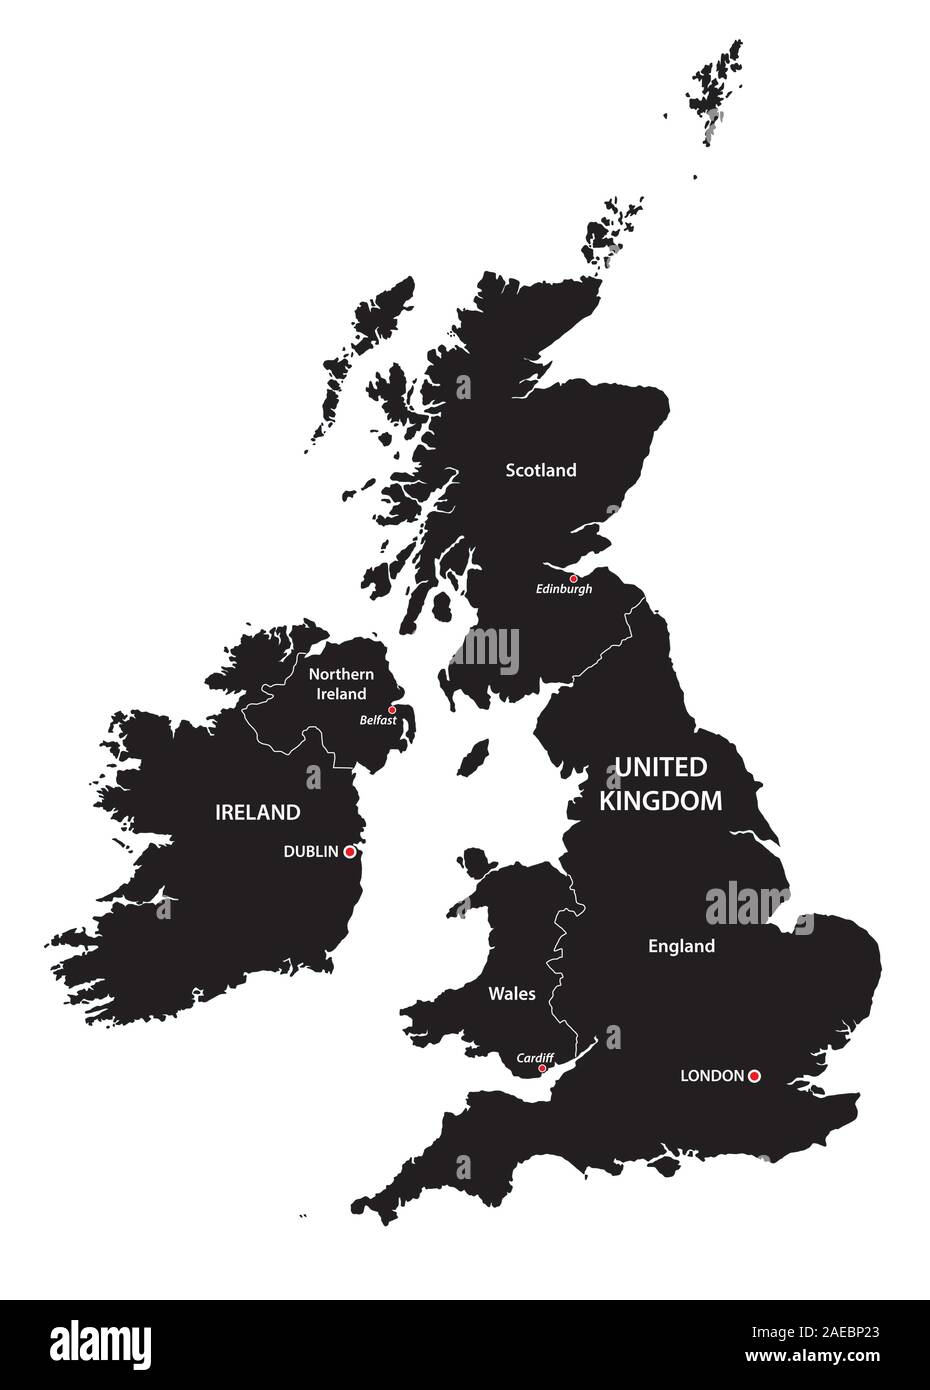 united kingdom and ireland map in black and white Stock Vector